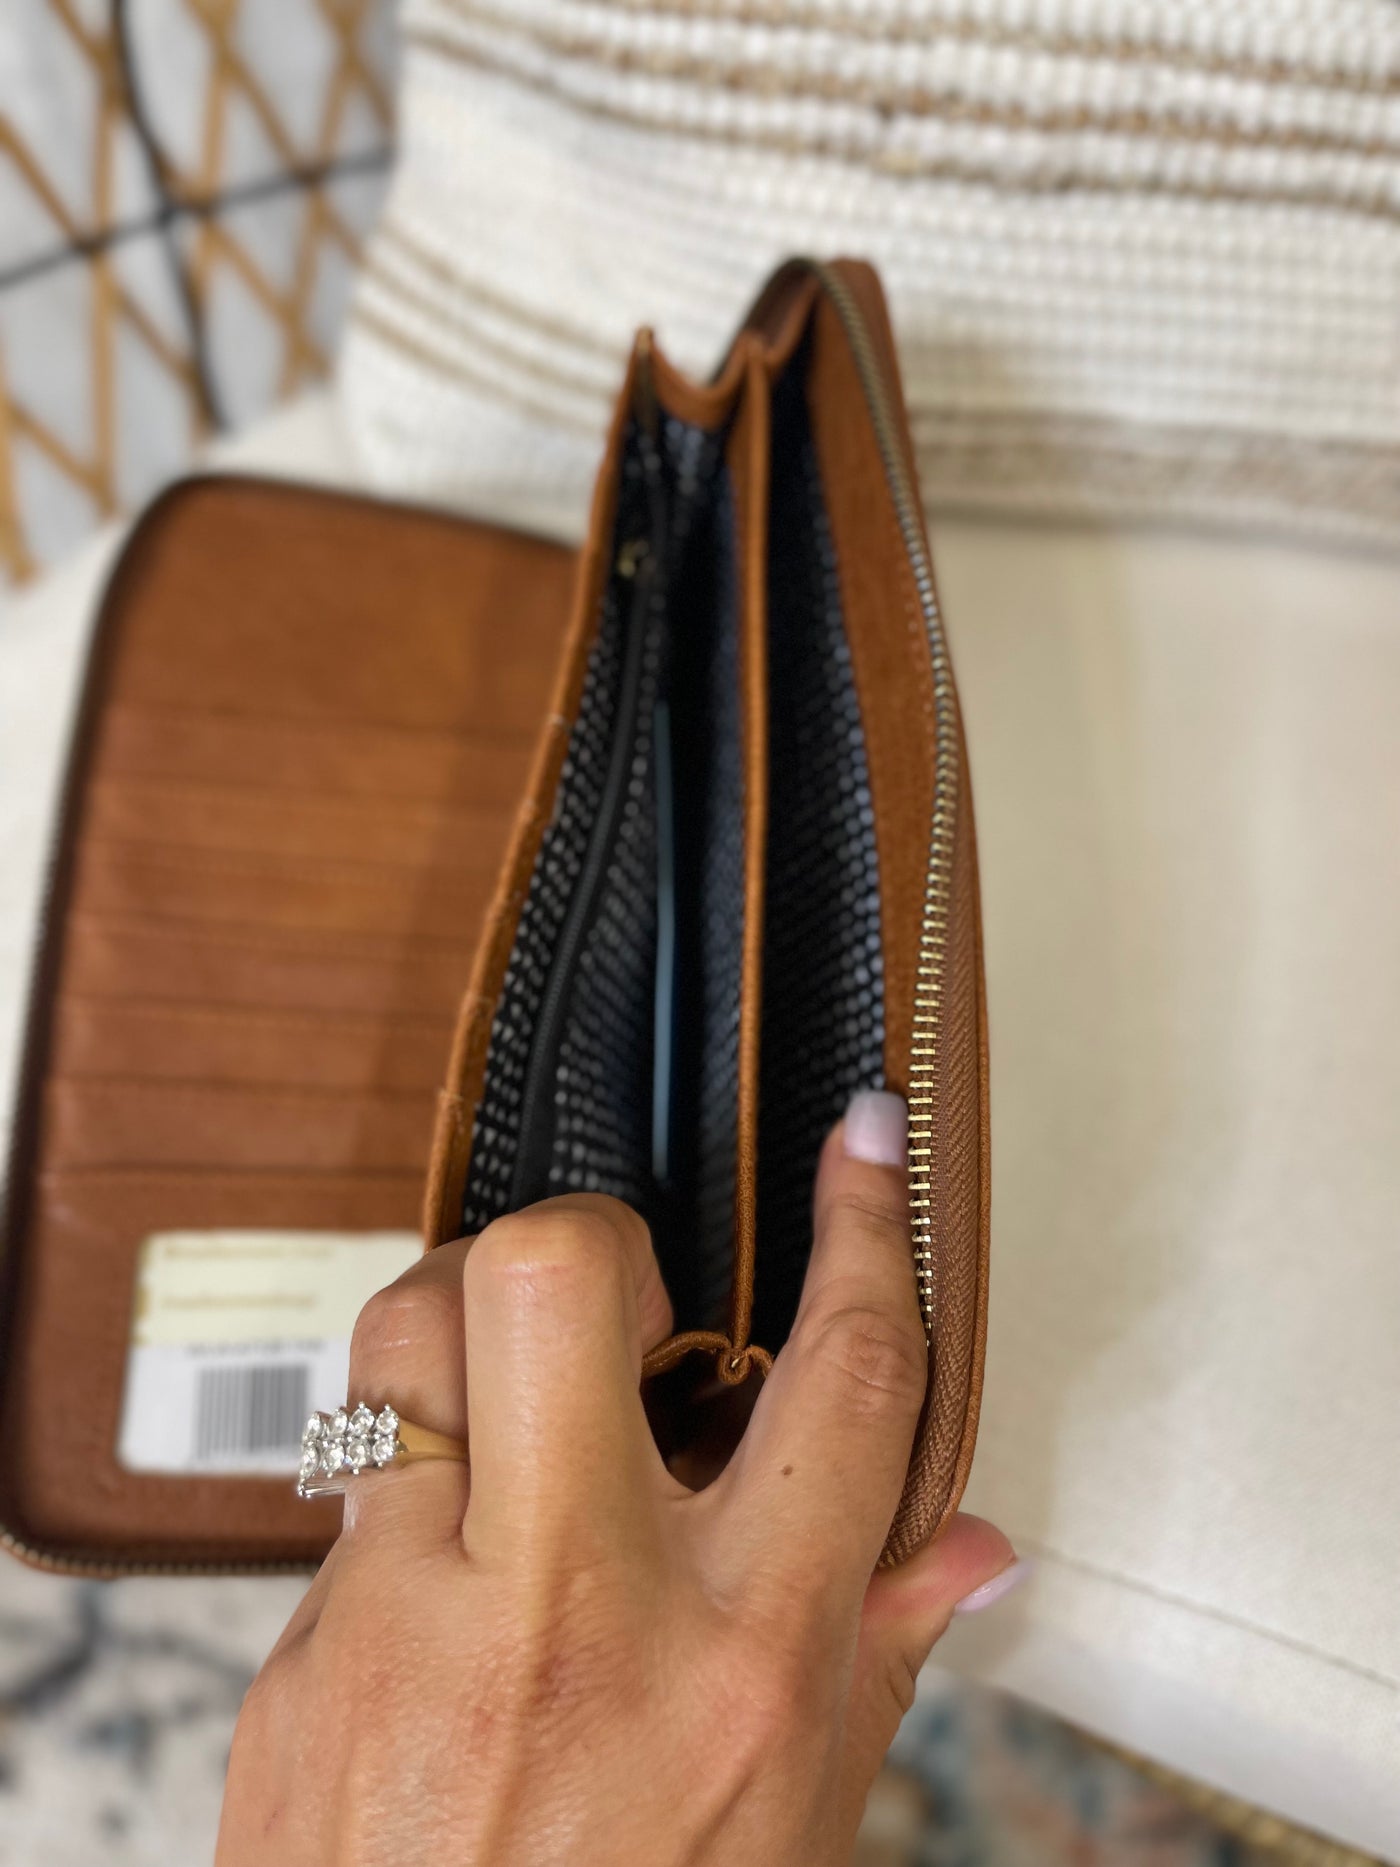 The ultimate Wallet